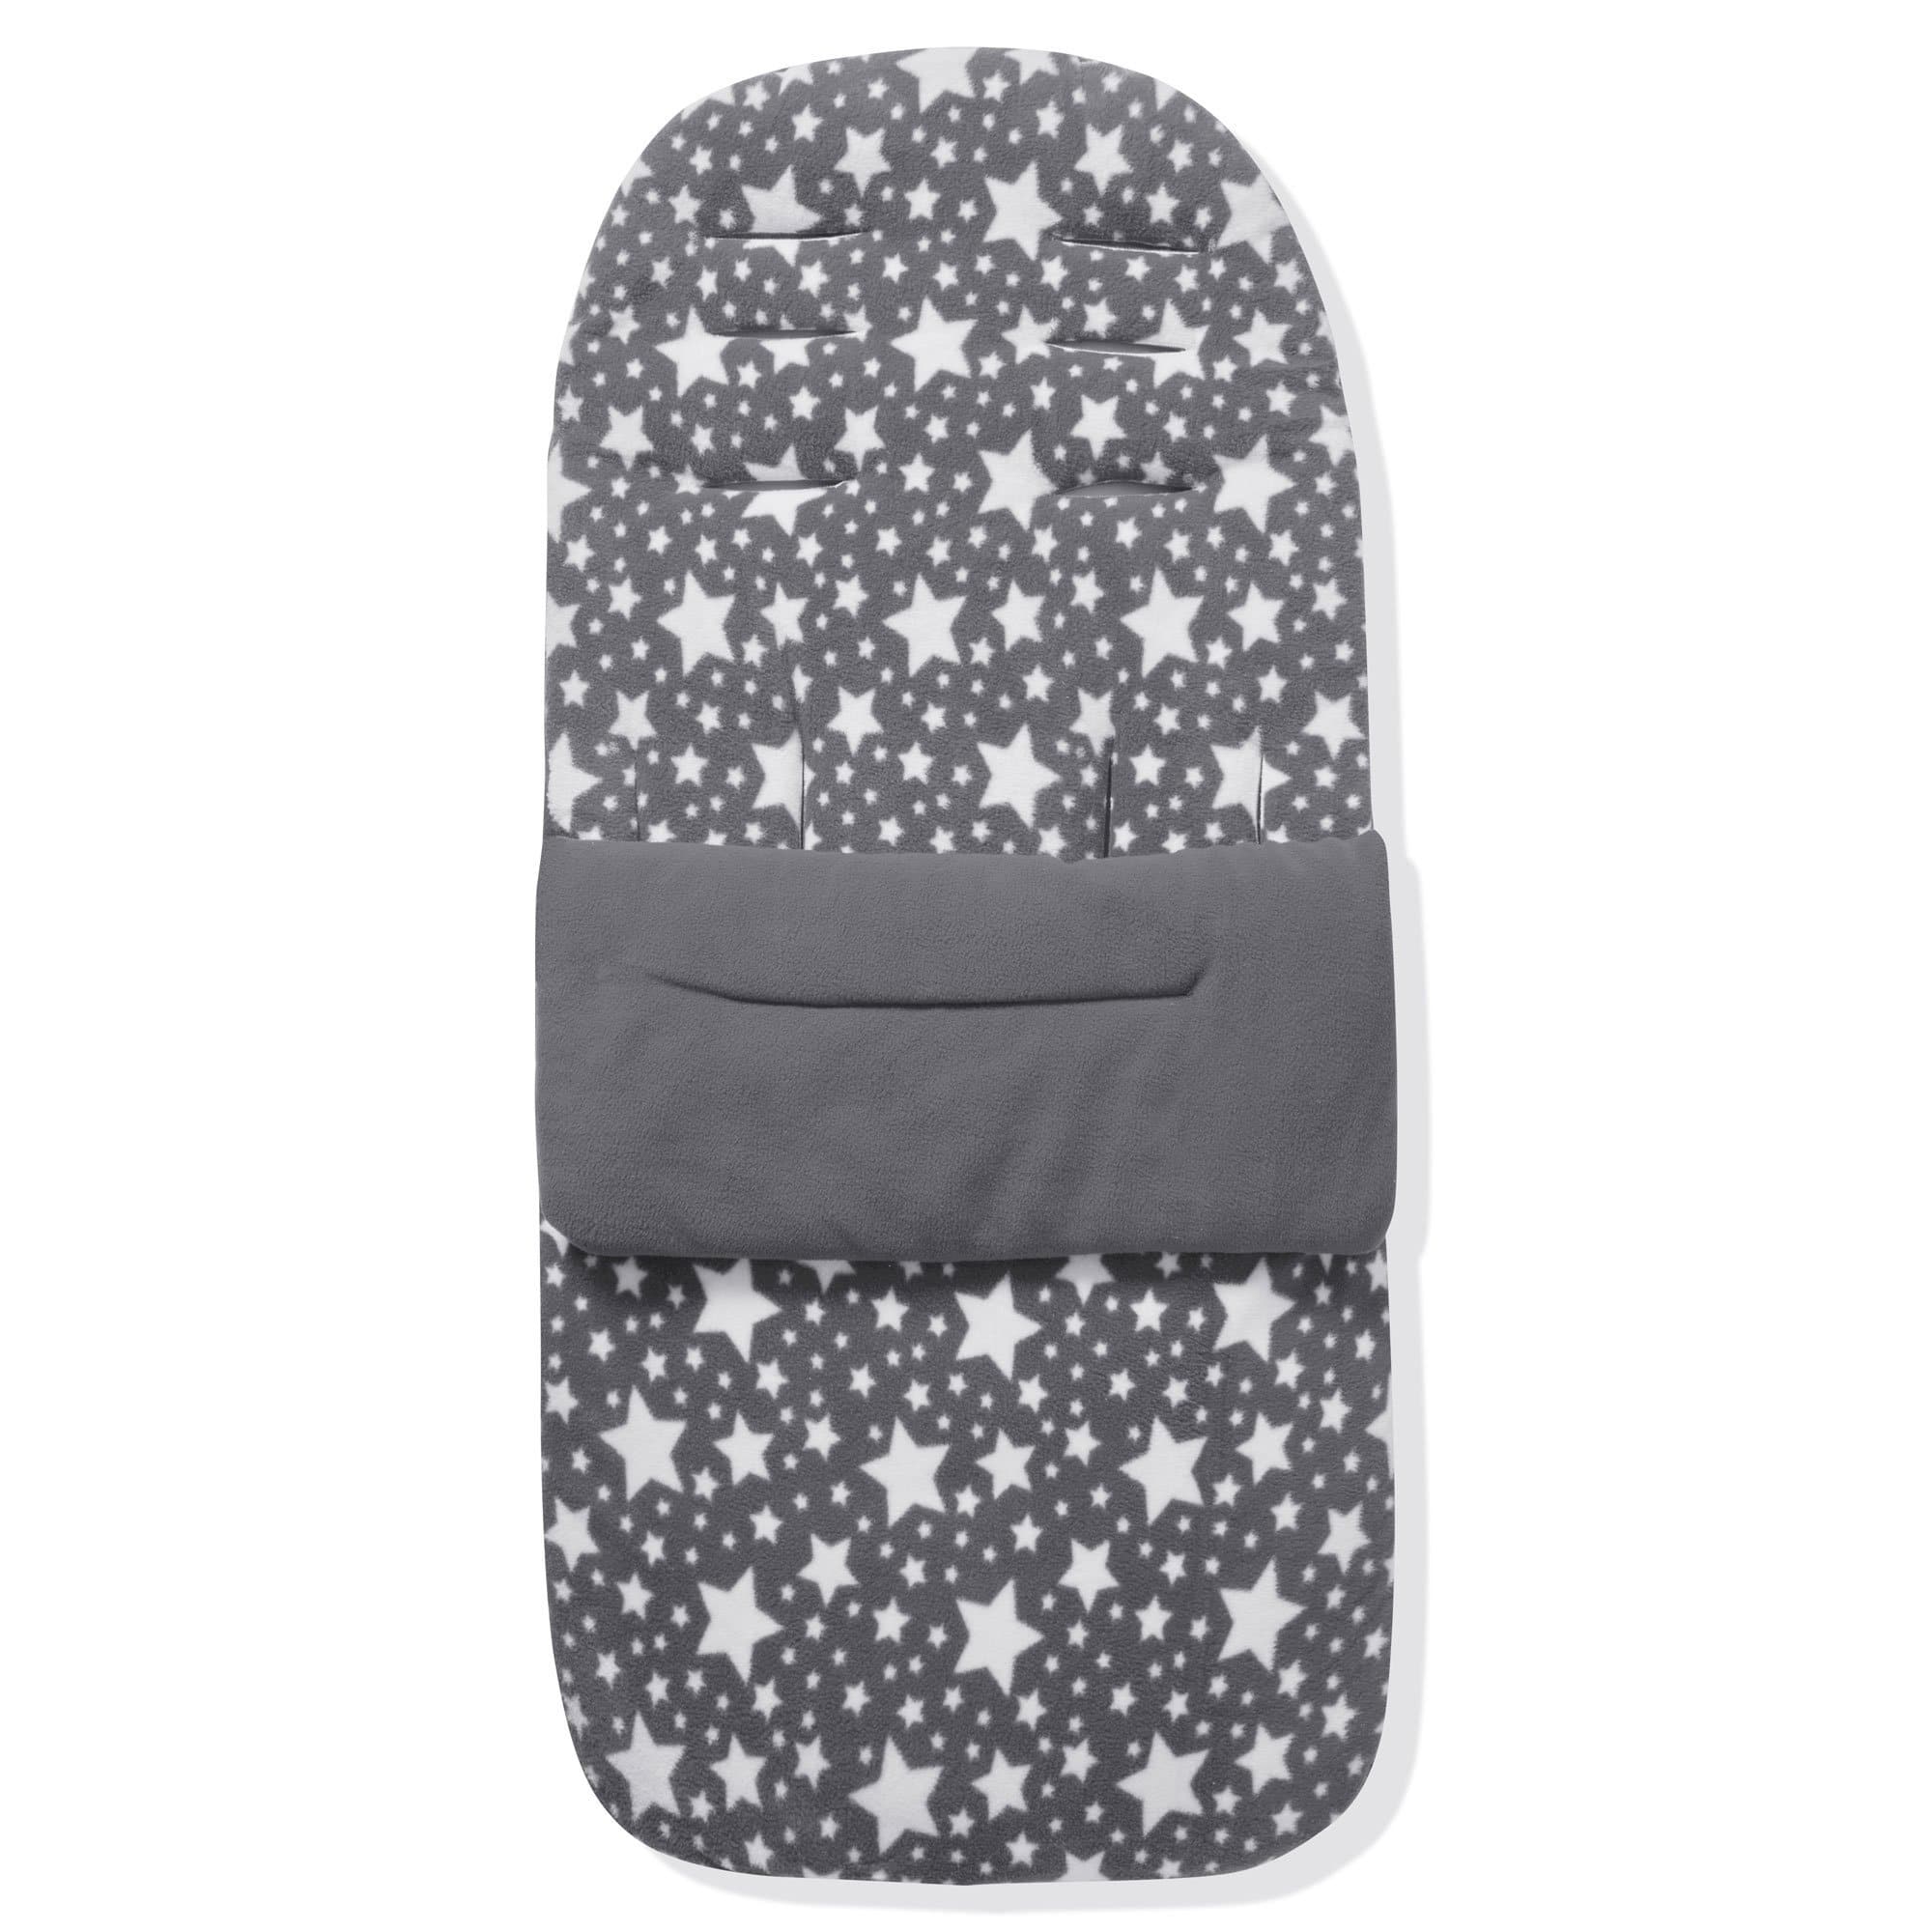 Fleece Footmuff / Cosy Toes Compatible with Firstwheels - Grey Star / Fits All Models | For Your Little One